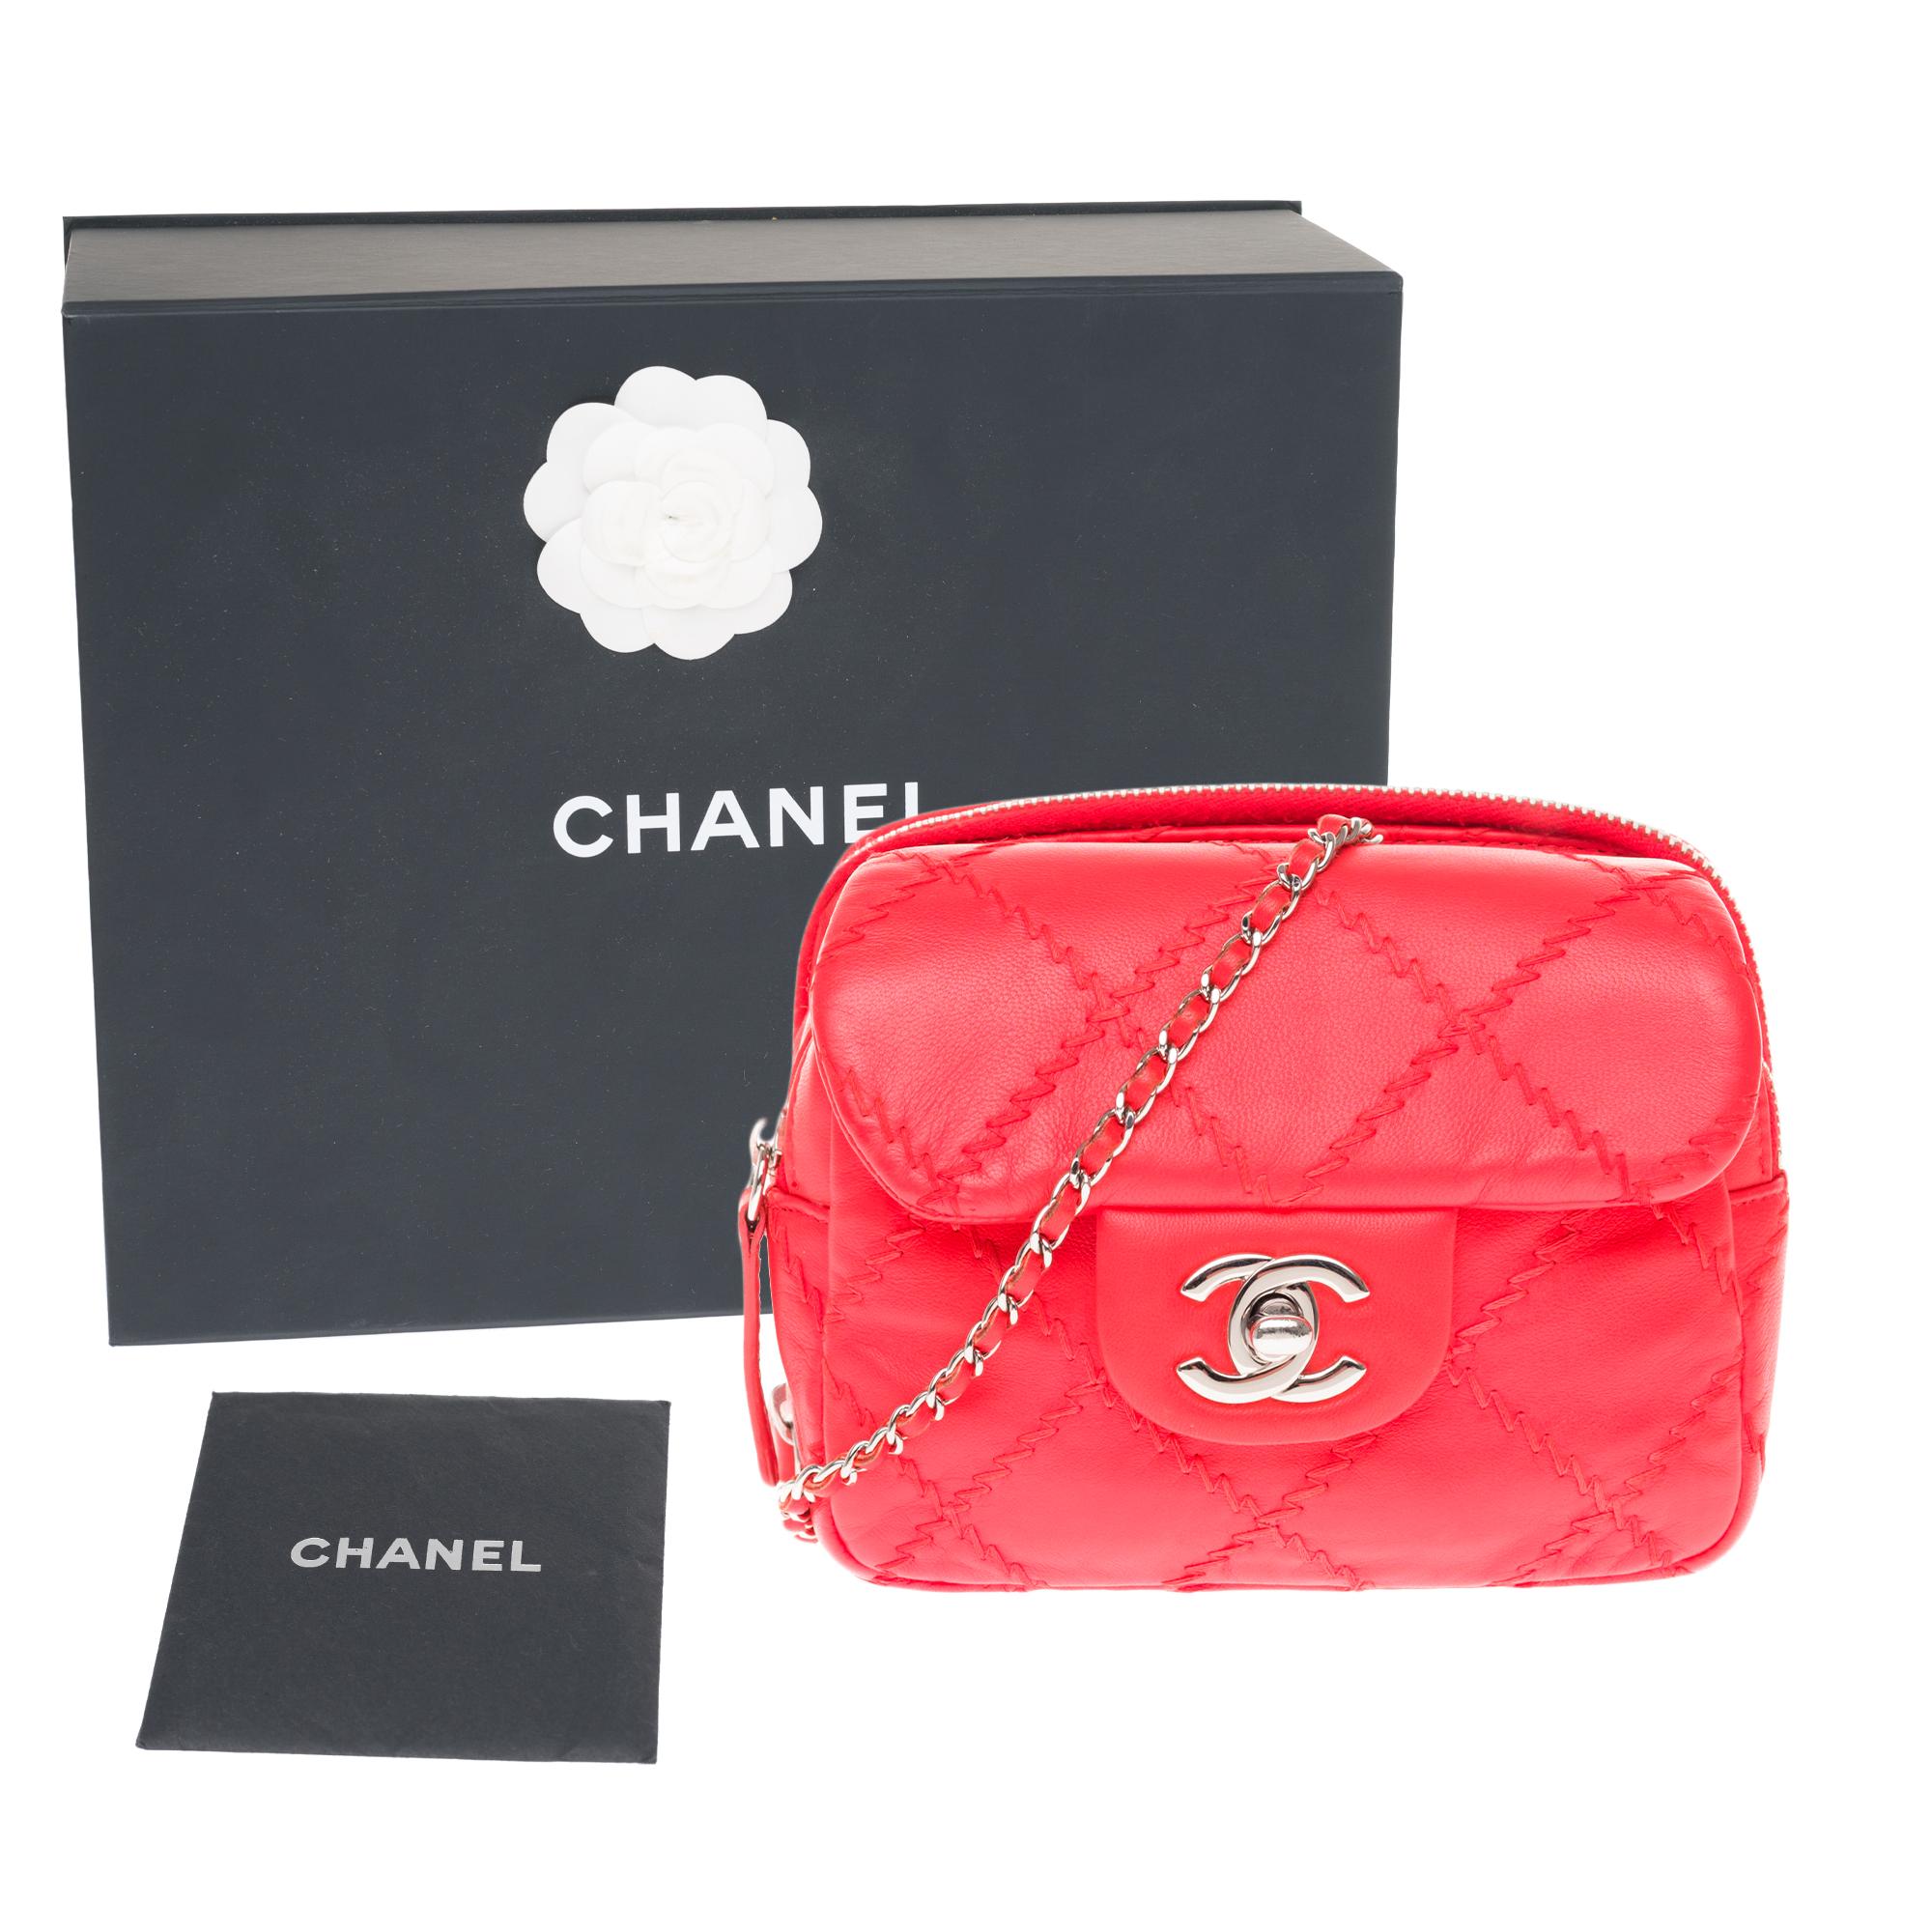 Amazing chanel Purse/Wallet in red leather and silver hardware 7